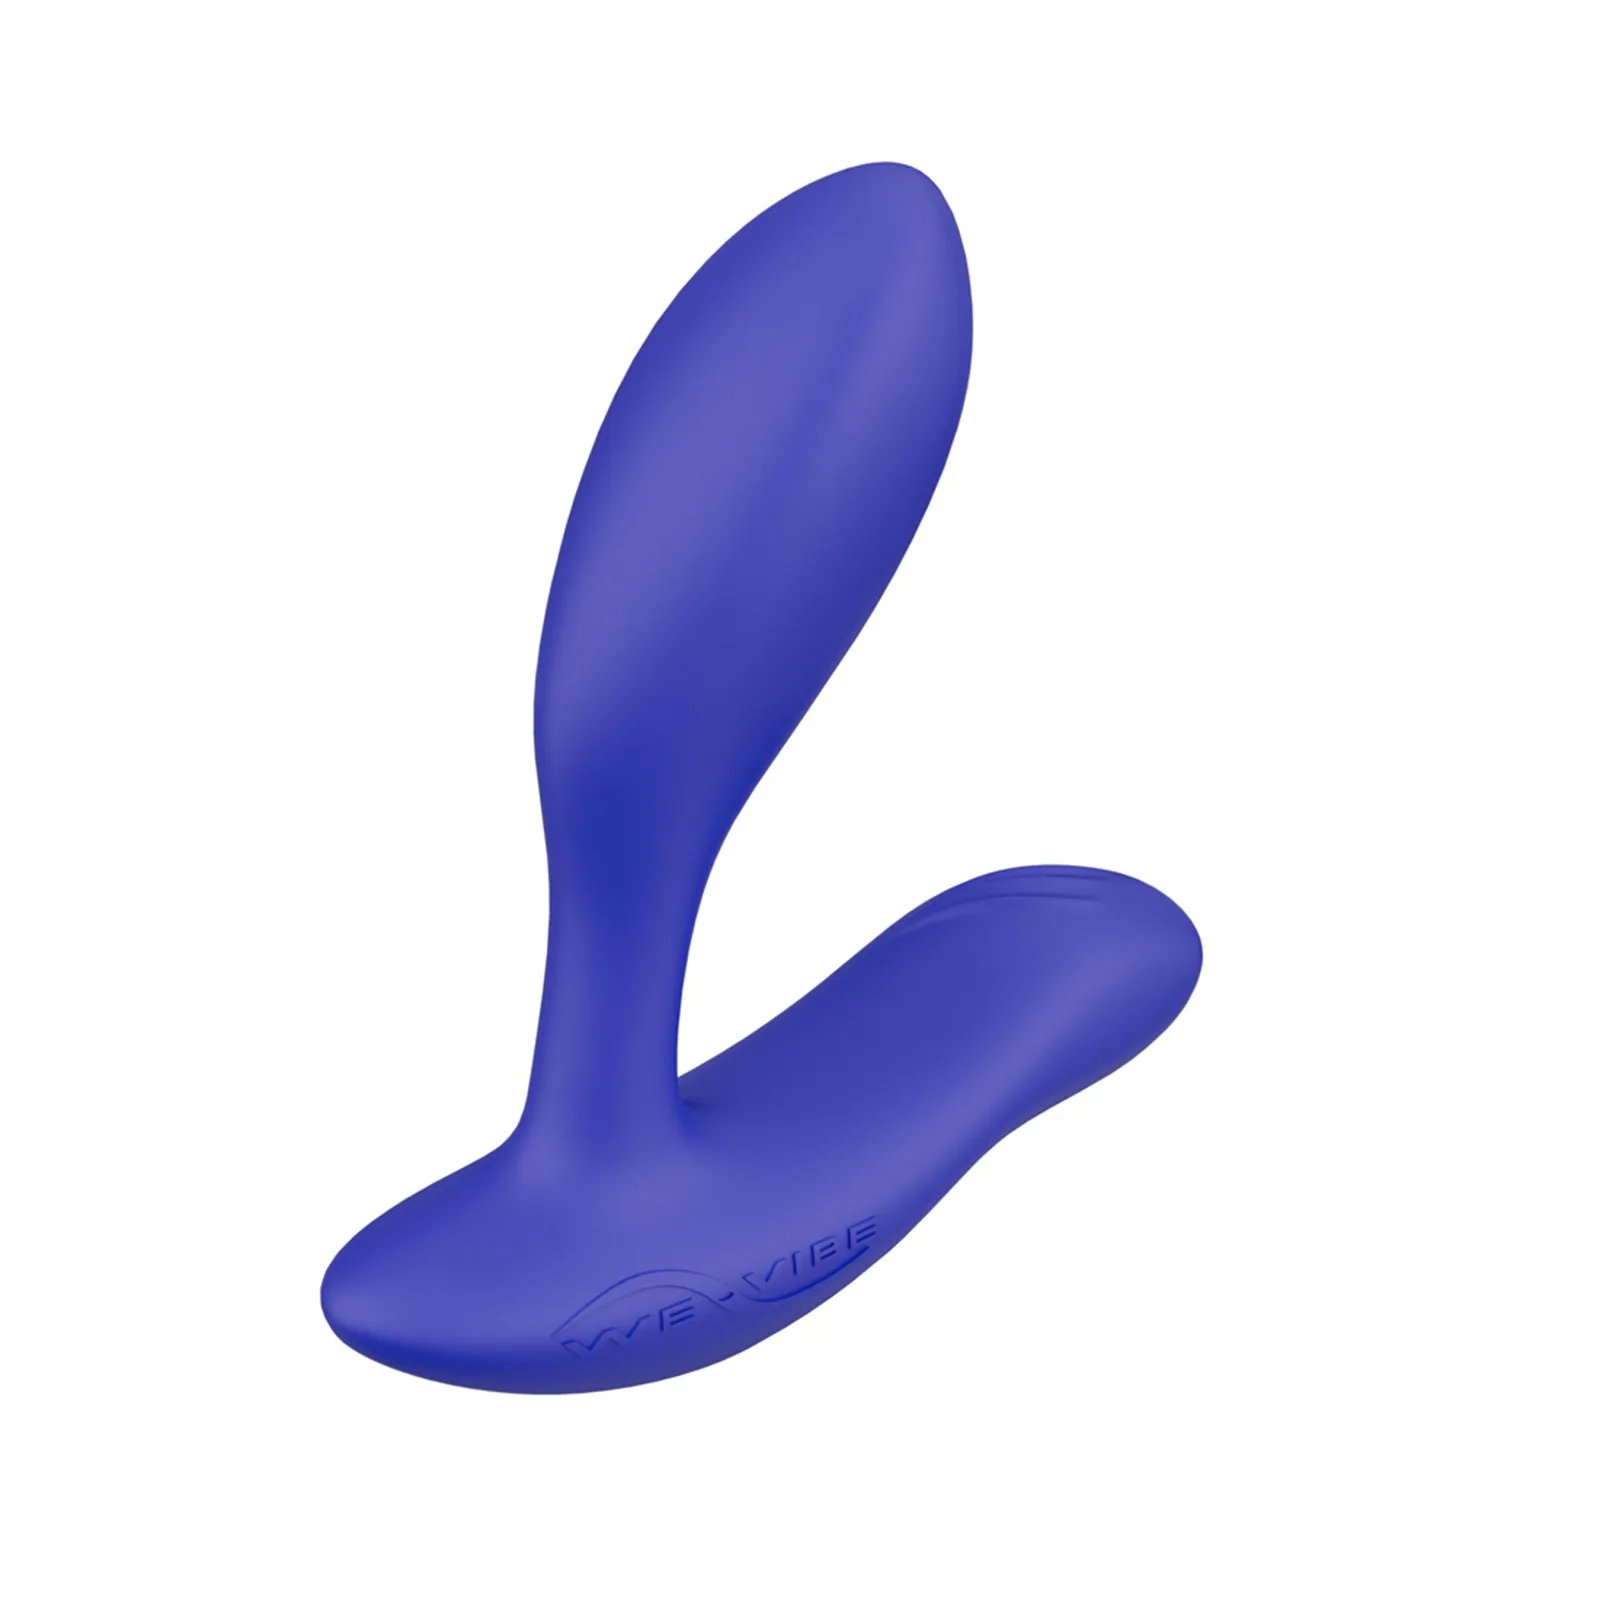 We-Vibe Vector+ blue 